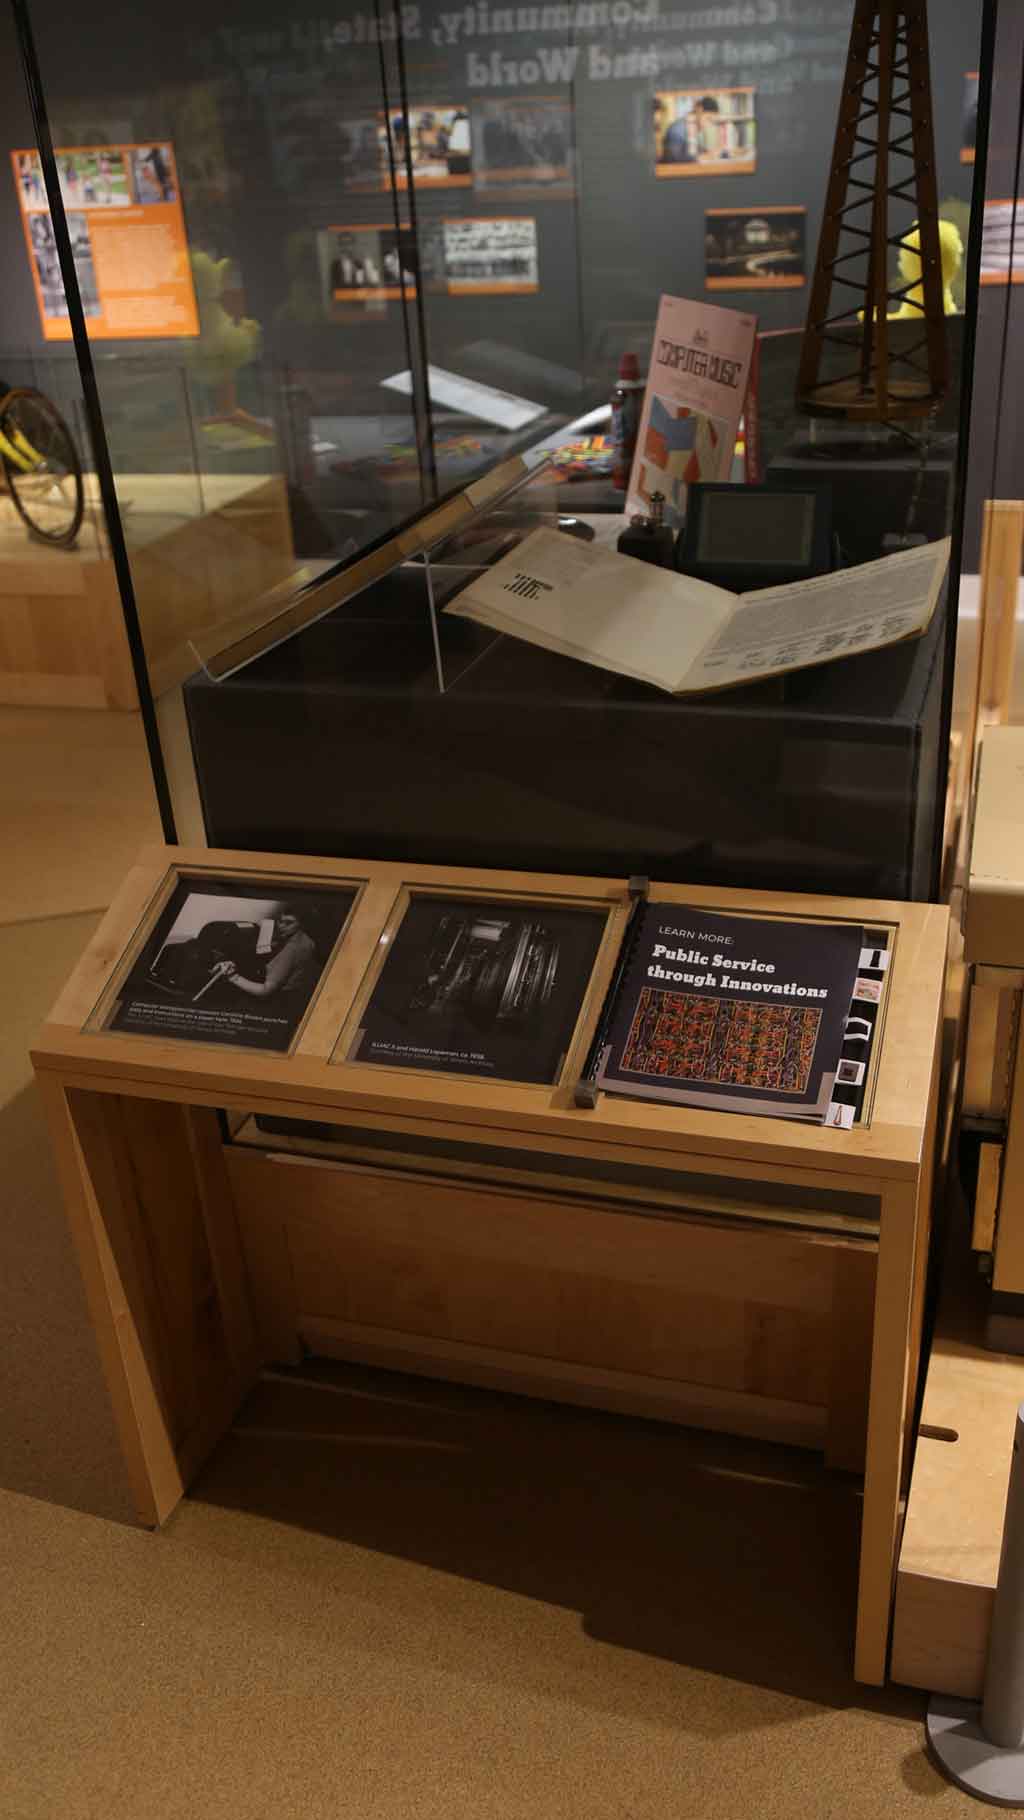 shot of a display case containing a tower looking structure and two books. An info book by it reads 'public service through innovation'